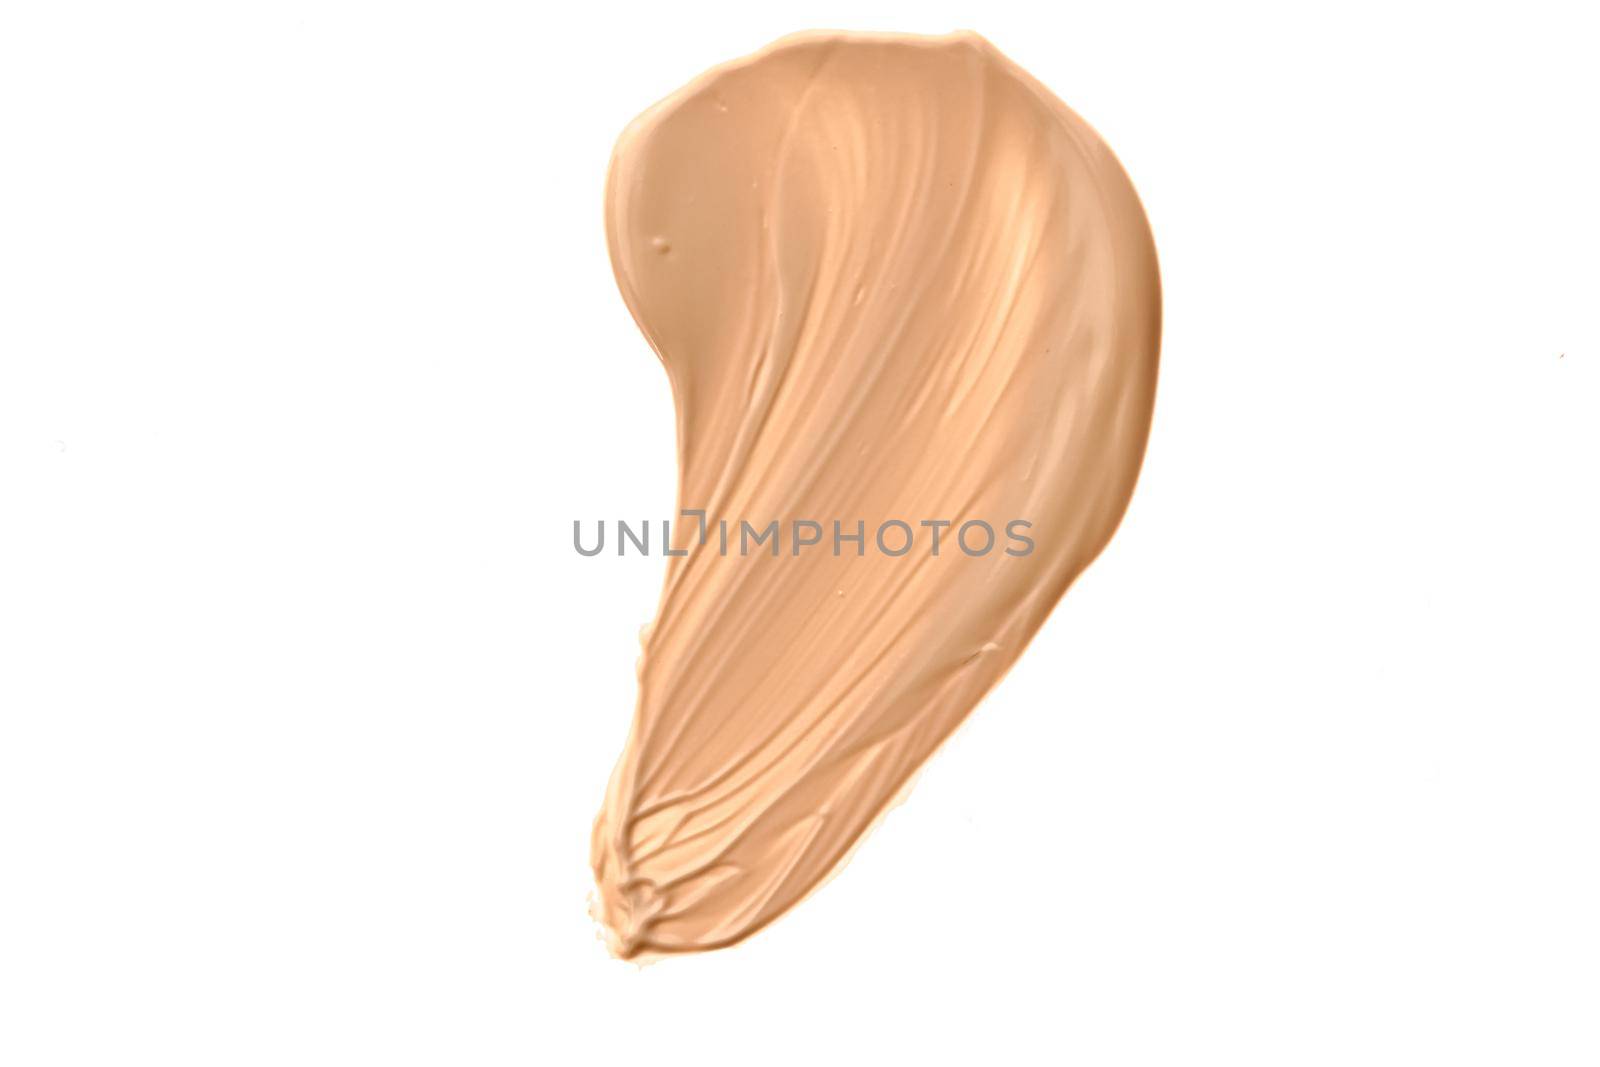 Beige beauty cosmetic texture isolated on white background, smudged makeup emulsion cream smear or foundation smudge, crushed cosmetics product and paint strokes.